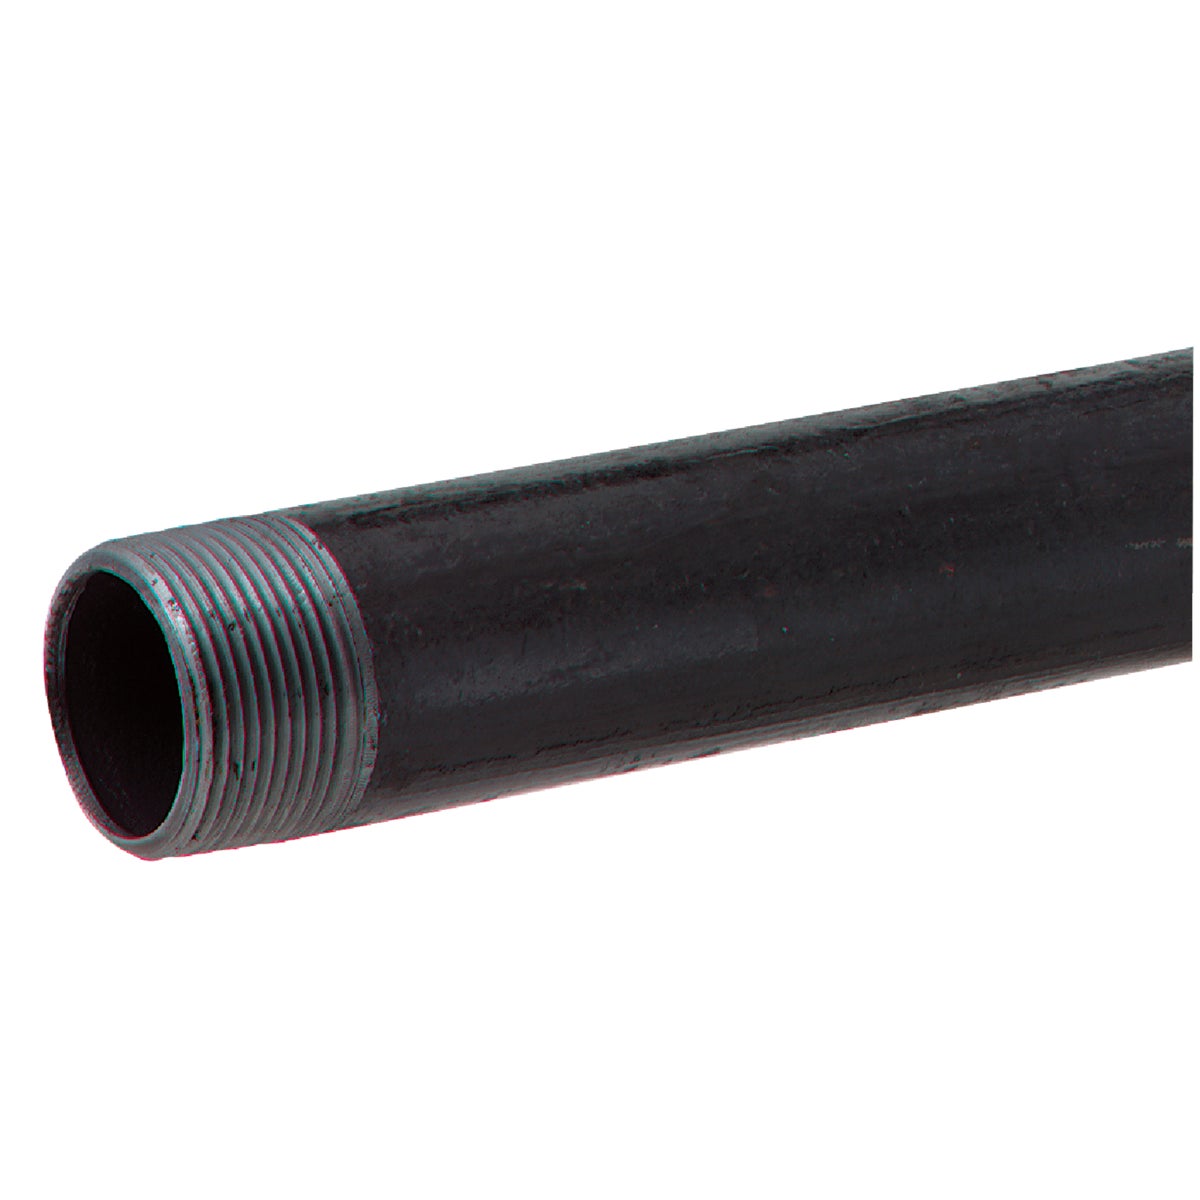 Southland 1-1/4 In. x 18 In. Carbon Steel Threaded Black Pipe